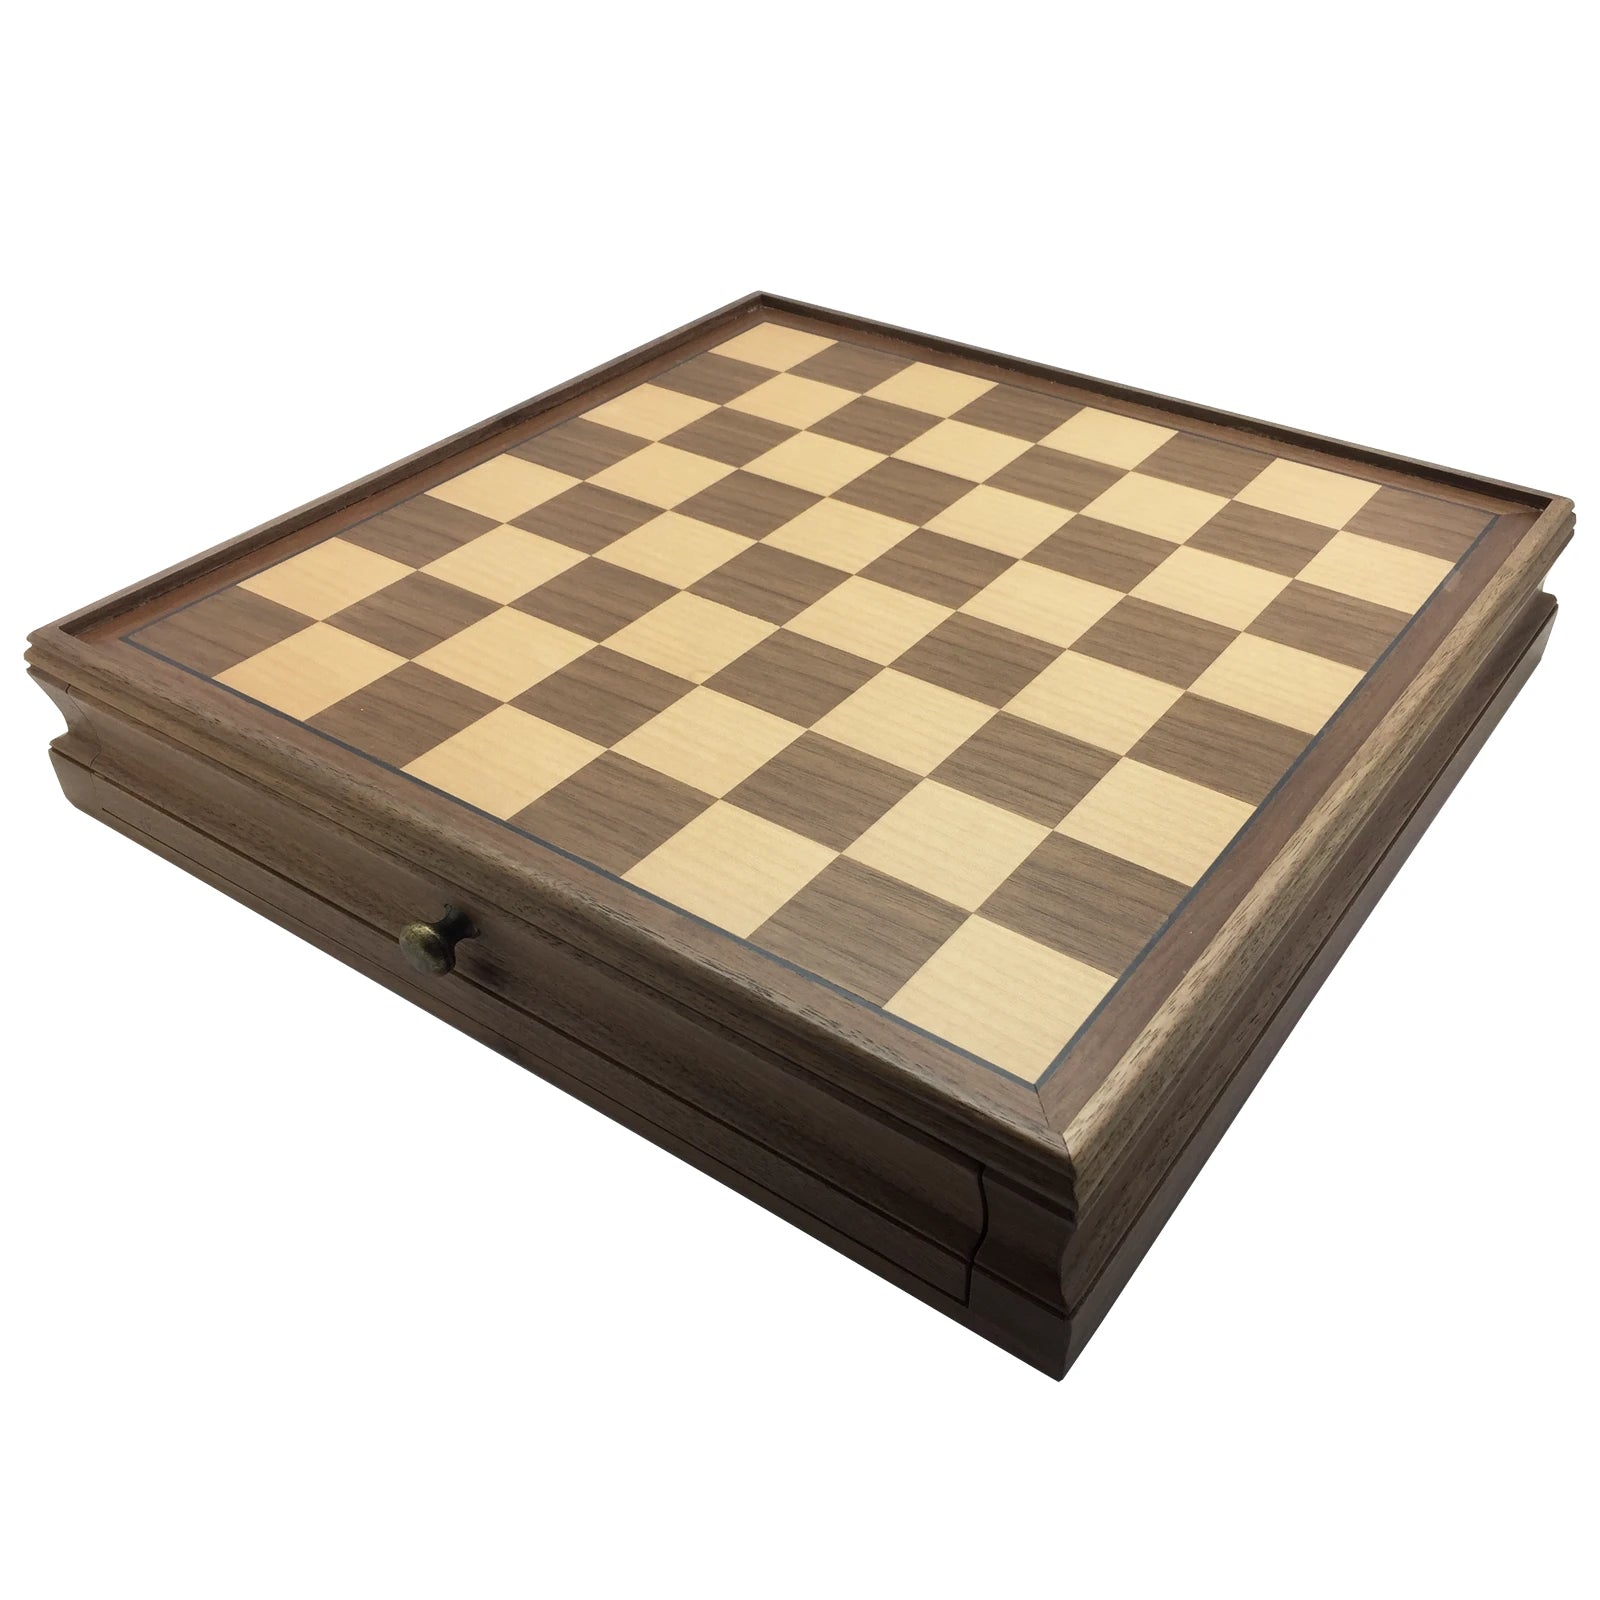 Wood chess set board with no pieces.